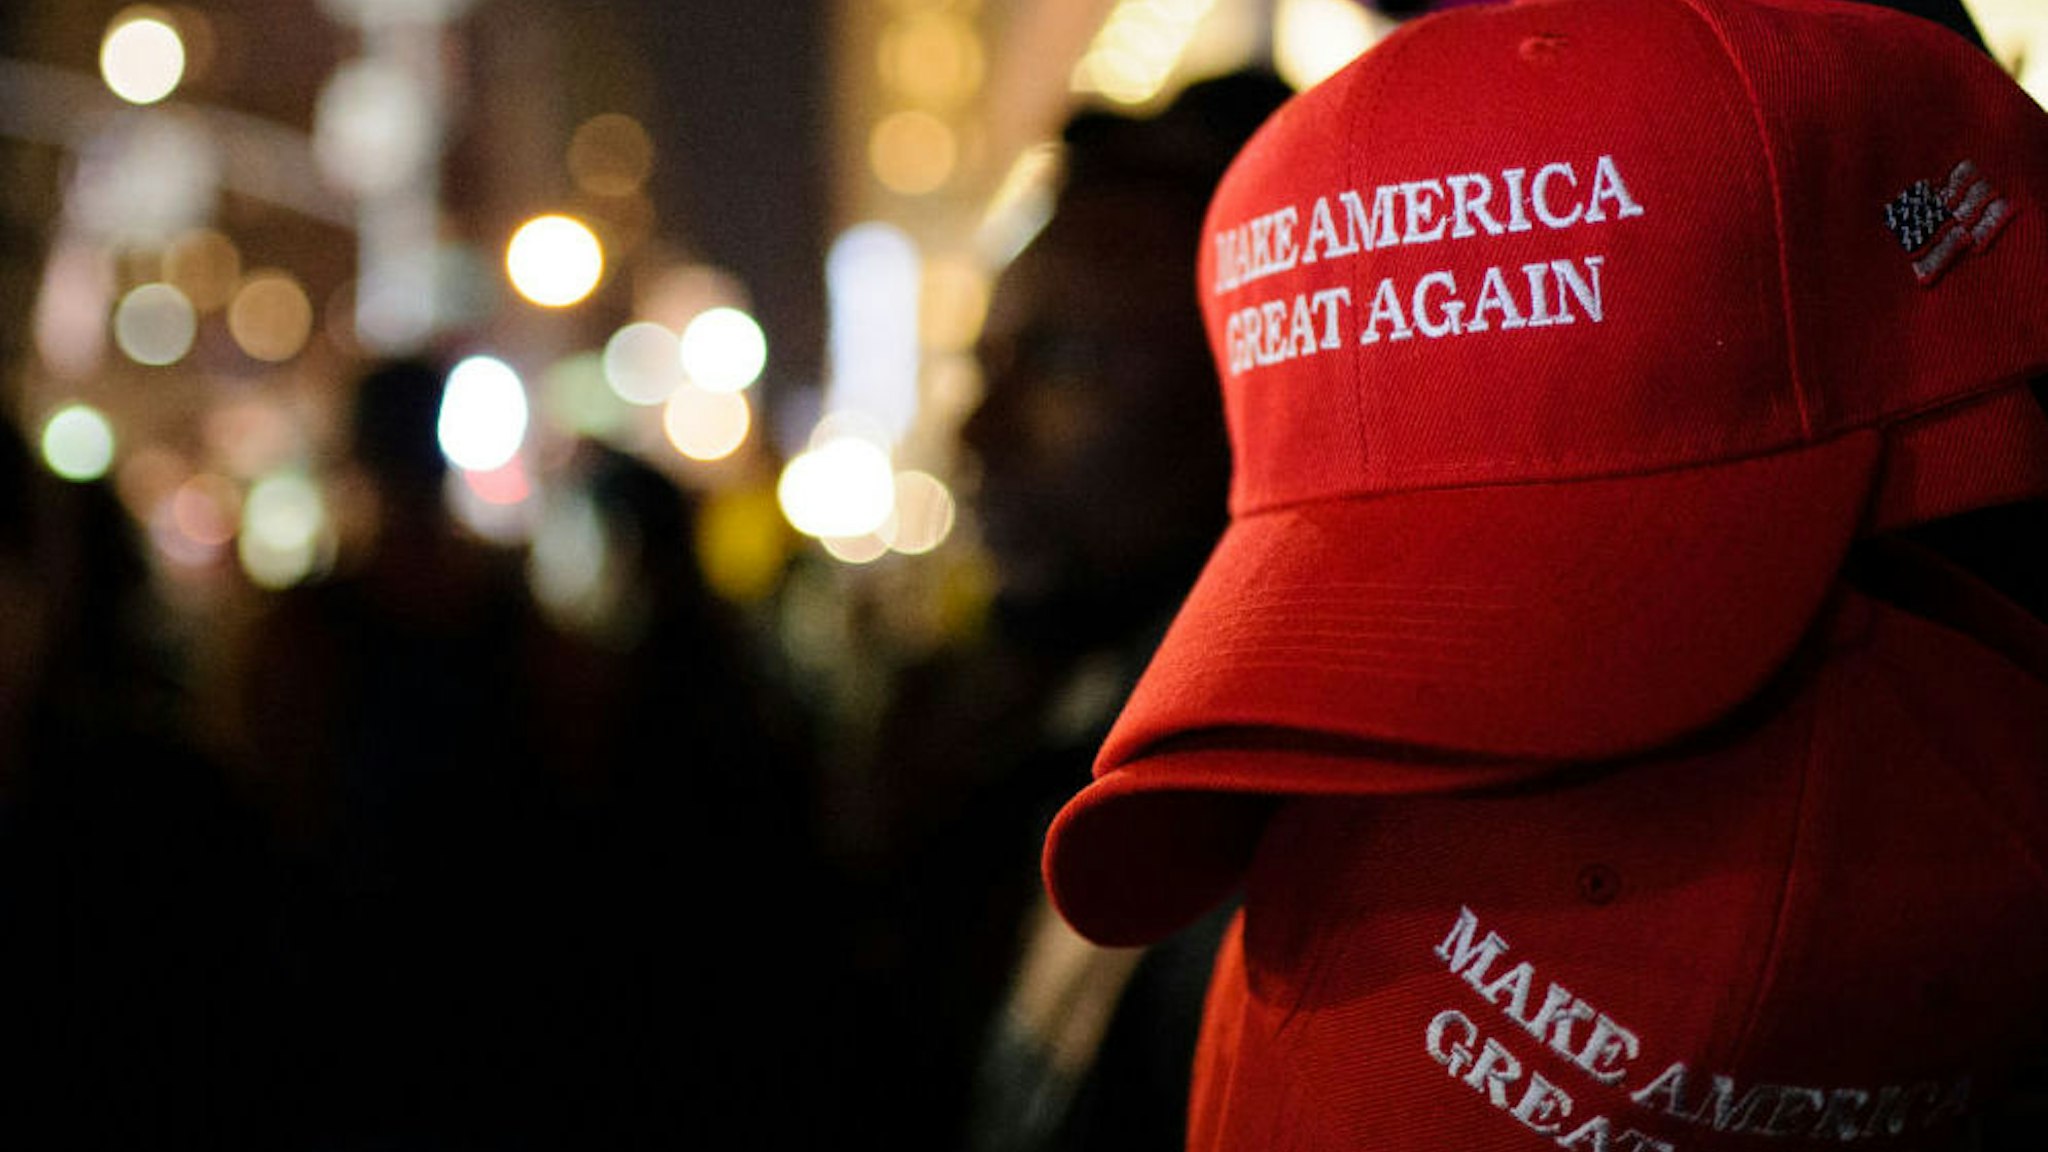 "Make America Great Again" red baseball caps, signature headwear of the Donald Trump campaign and its supporters, stand on sale on 6th Avenue in Midtown Manhattan in the second hour after Election Day as election results point to a shock Trump win. (Photo by David Cliff/SOPA Images/LightRocket via Getty Images)